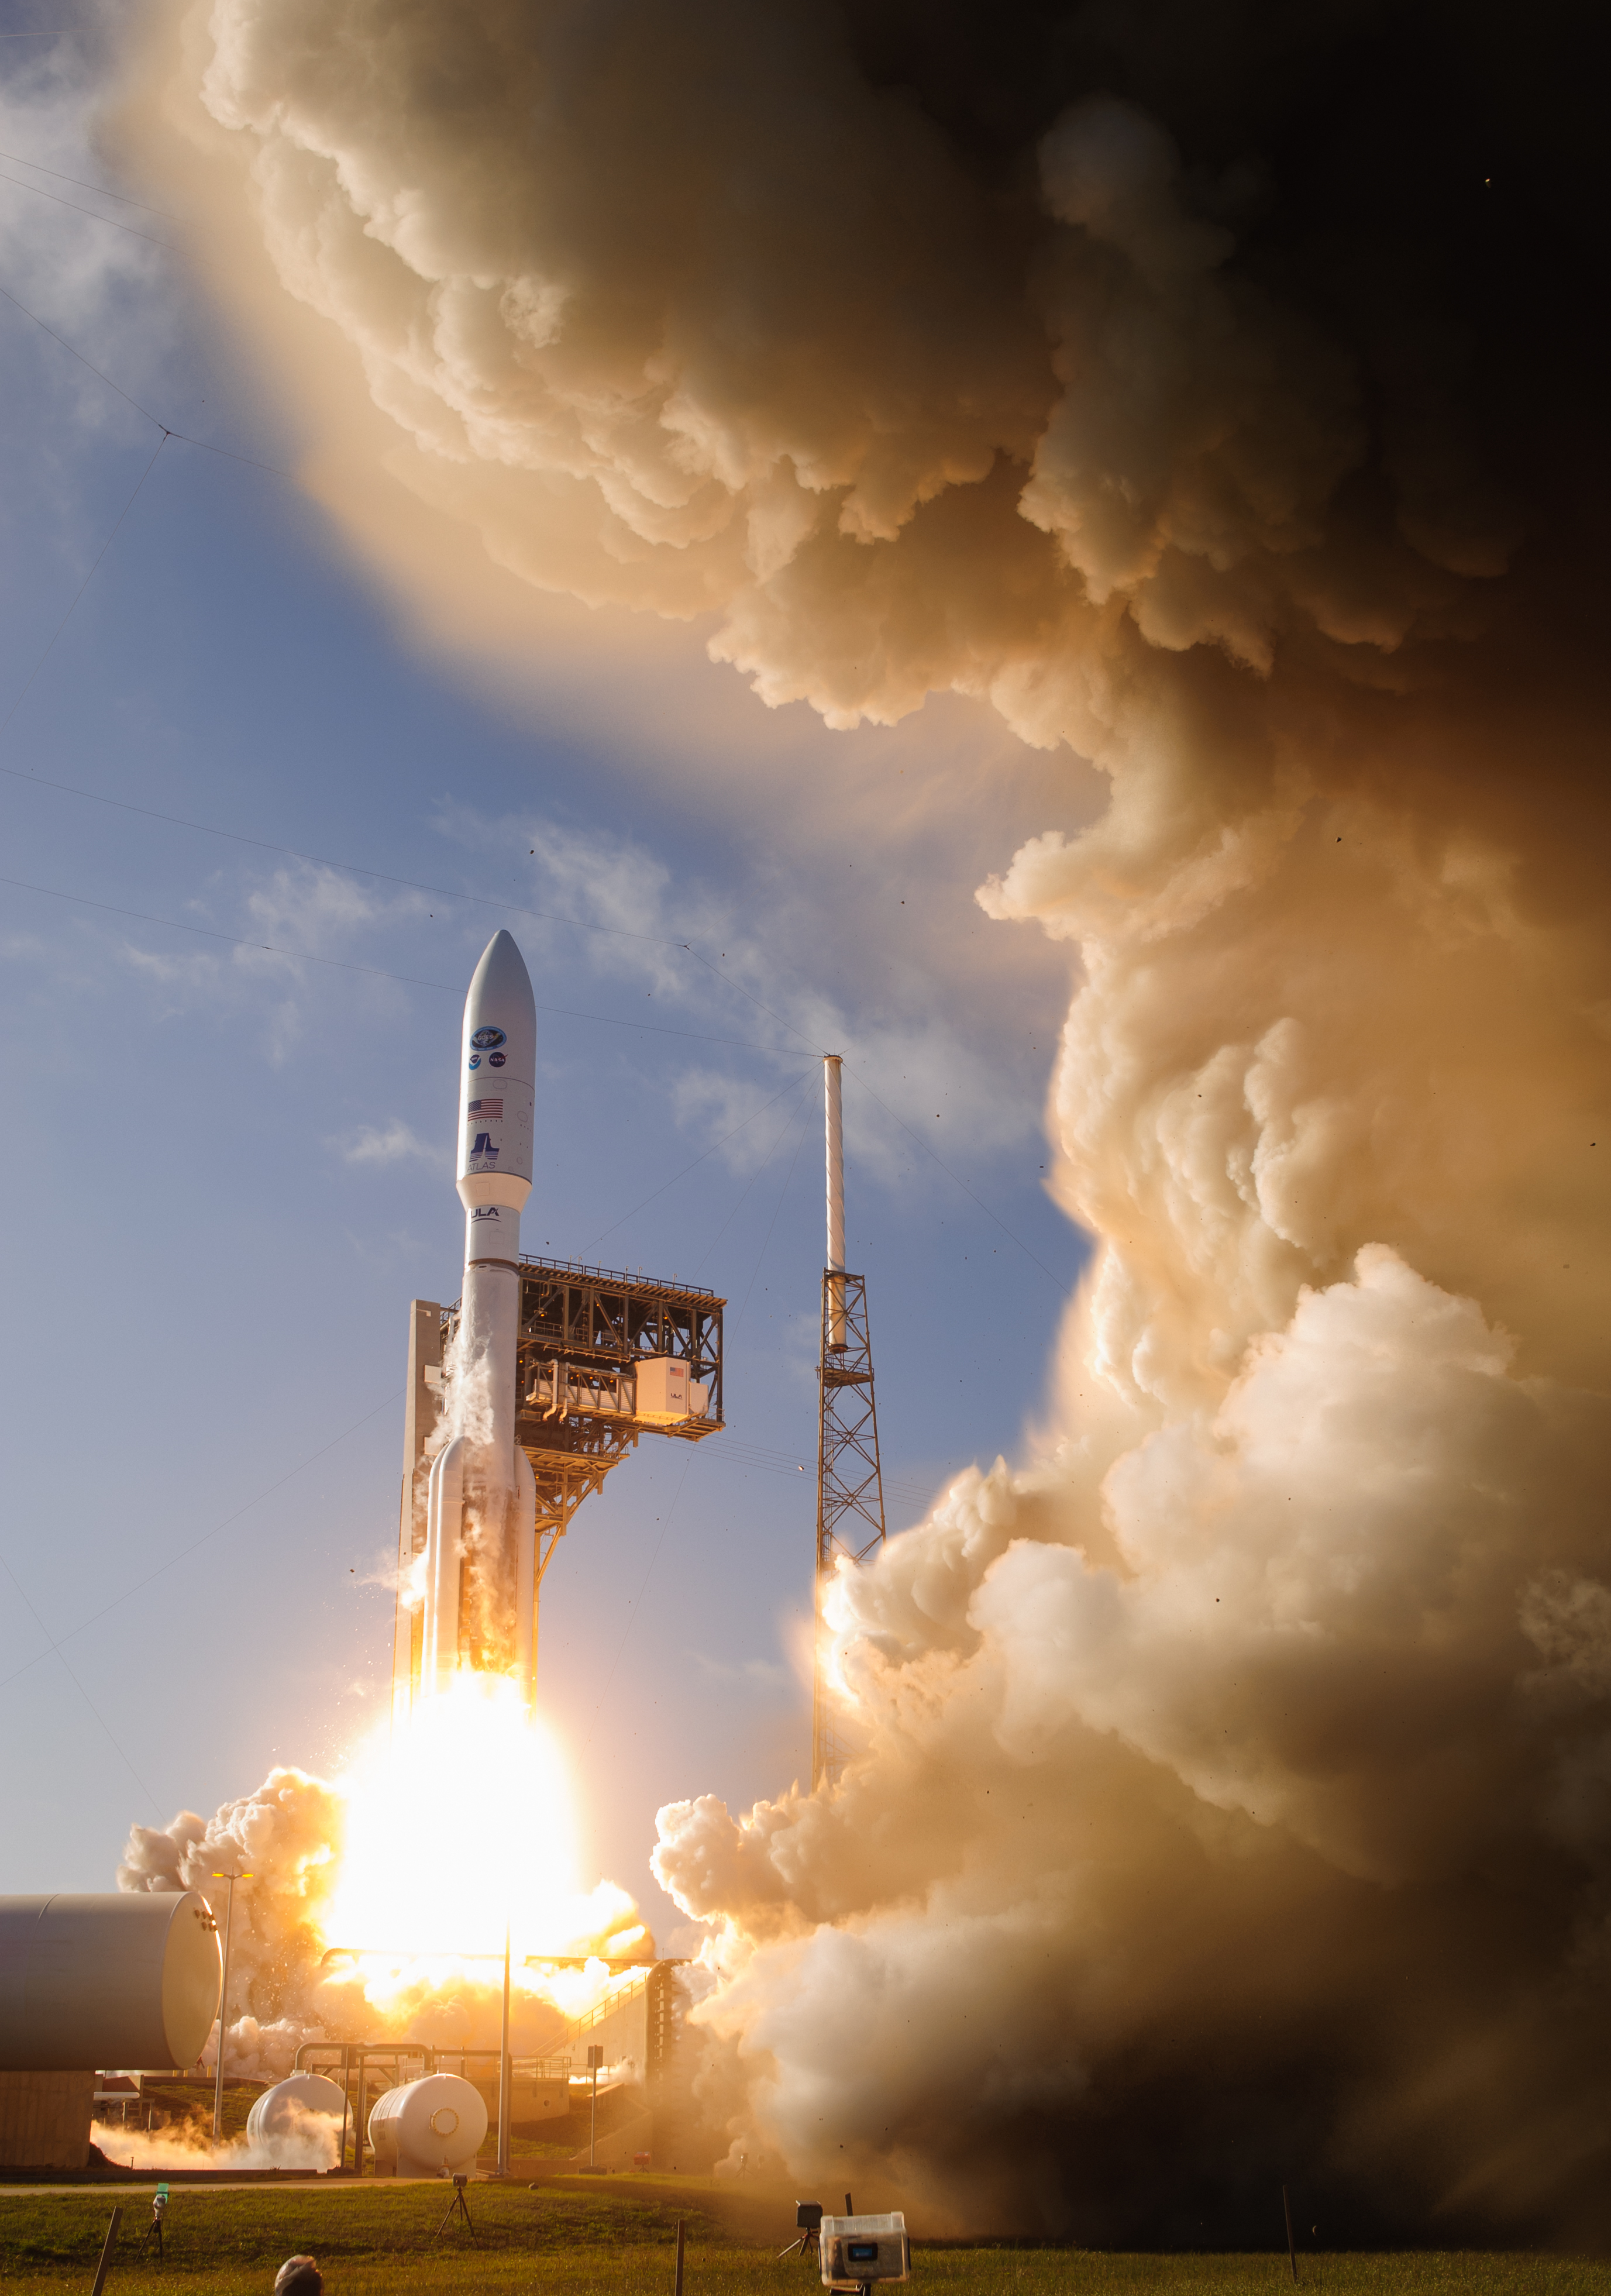 A United Launch Alliance Atlas V rocket lifts off from Cape Canaveral Space Force Station, carrying the GOES-T satellite.